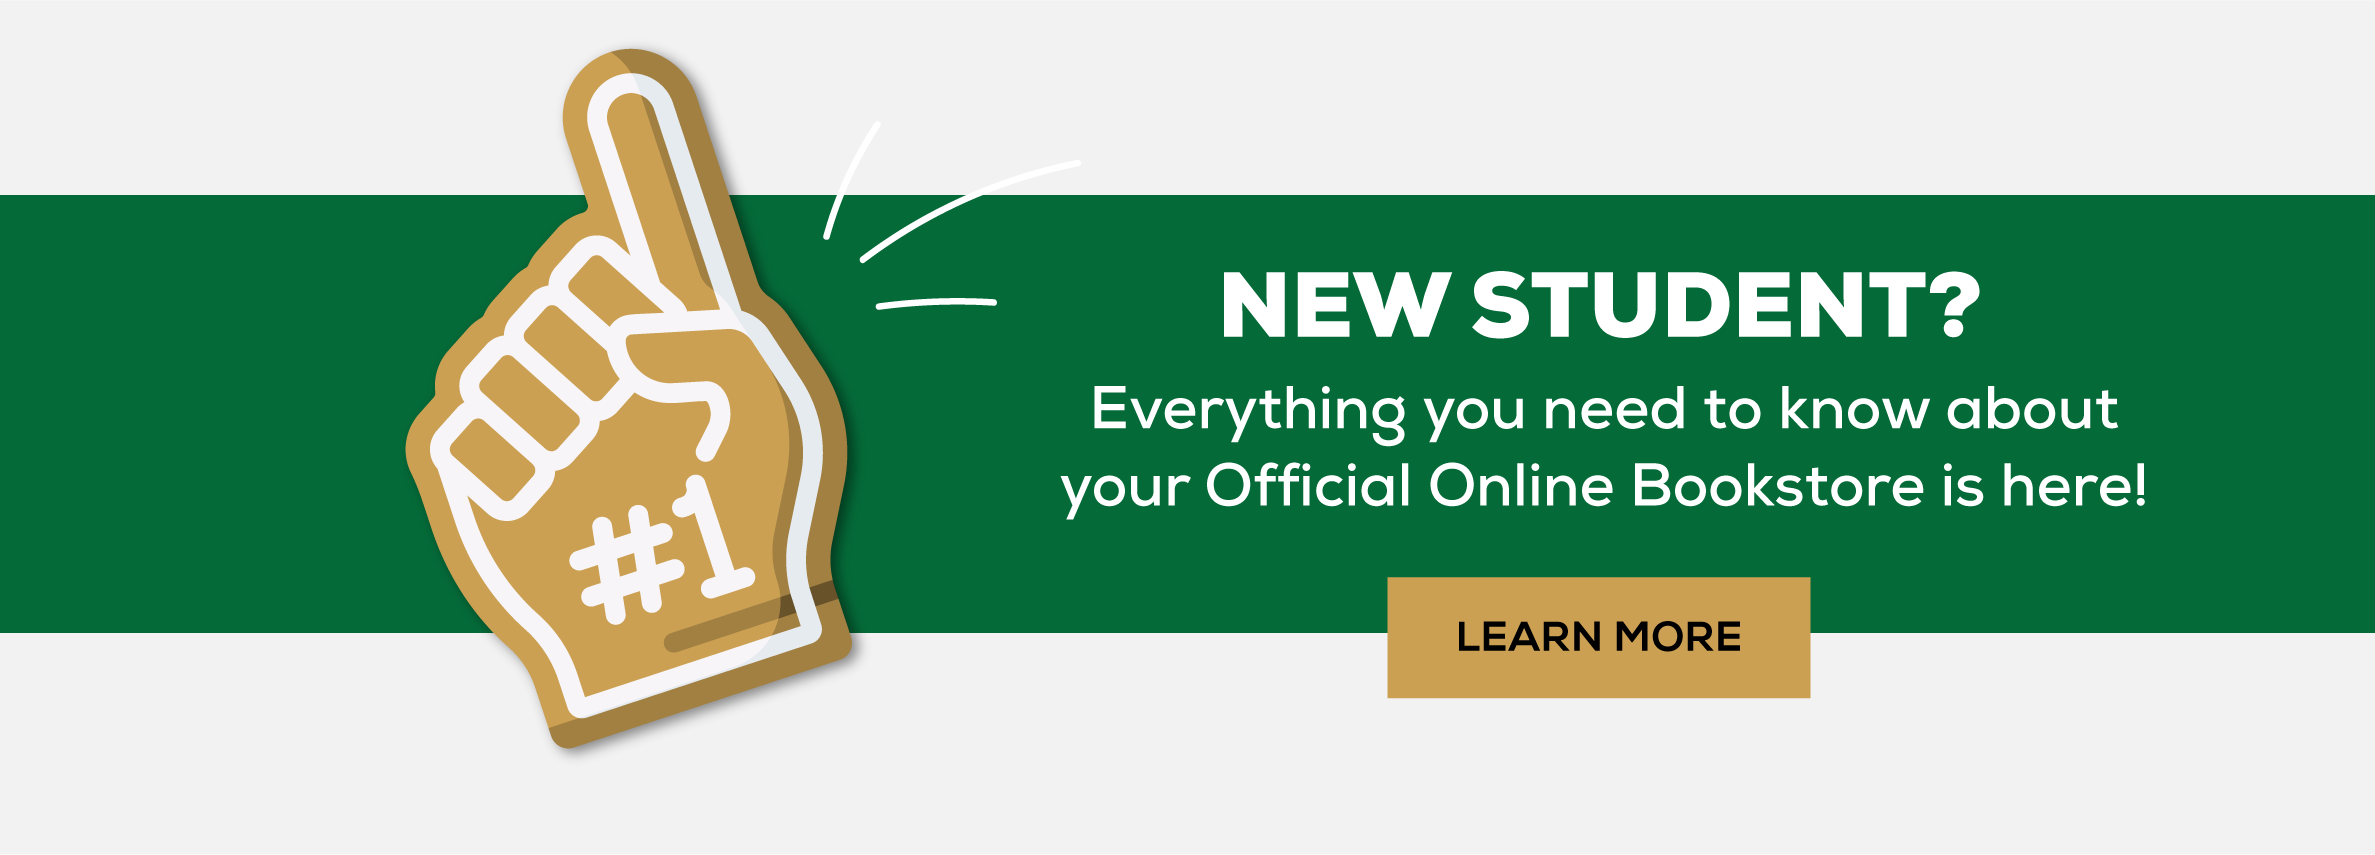 New student? Everything you need to know about your Official Online Bookstore is here! Learn More. (new tab)